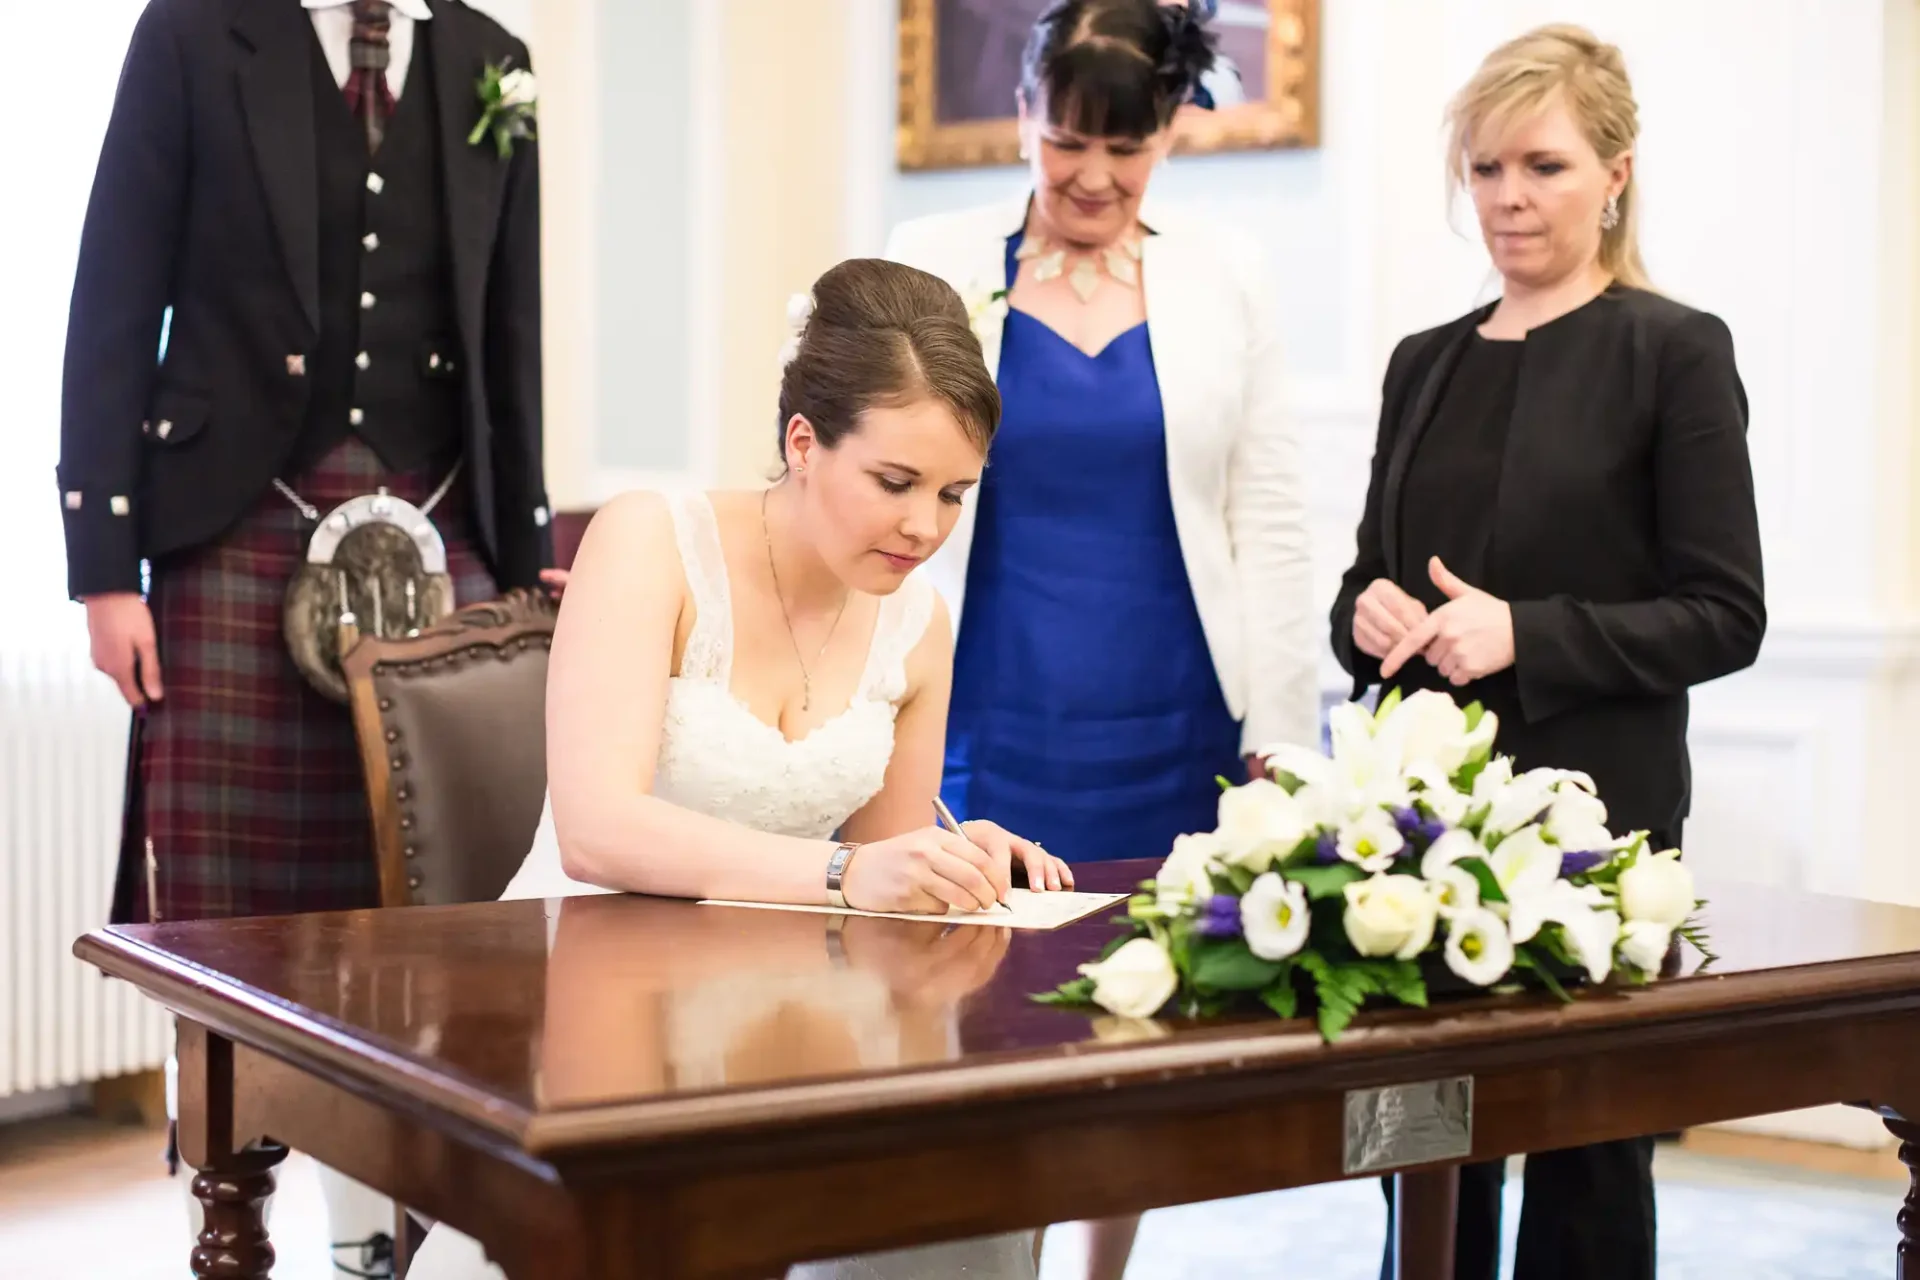 A bride in a white dress signs a document at a table, with a floral arrangement in front and two people watching her in a formal room.